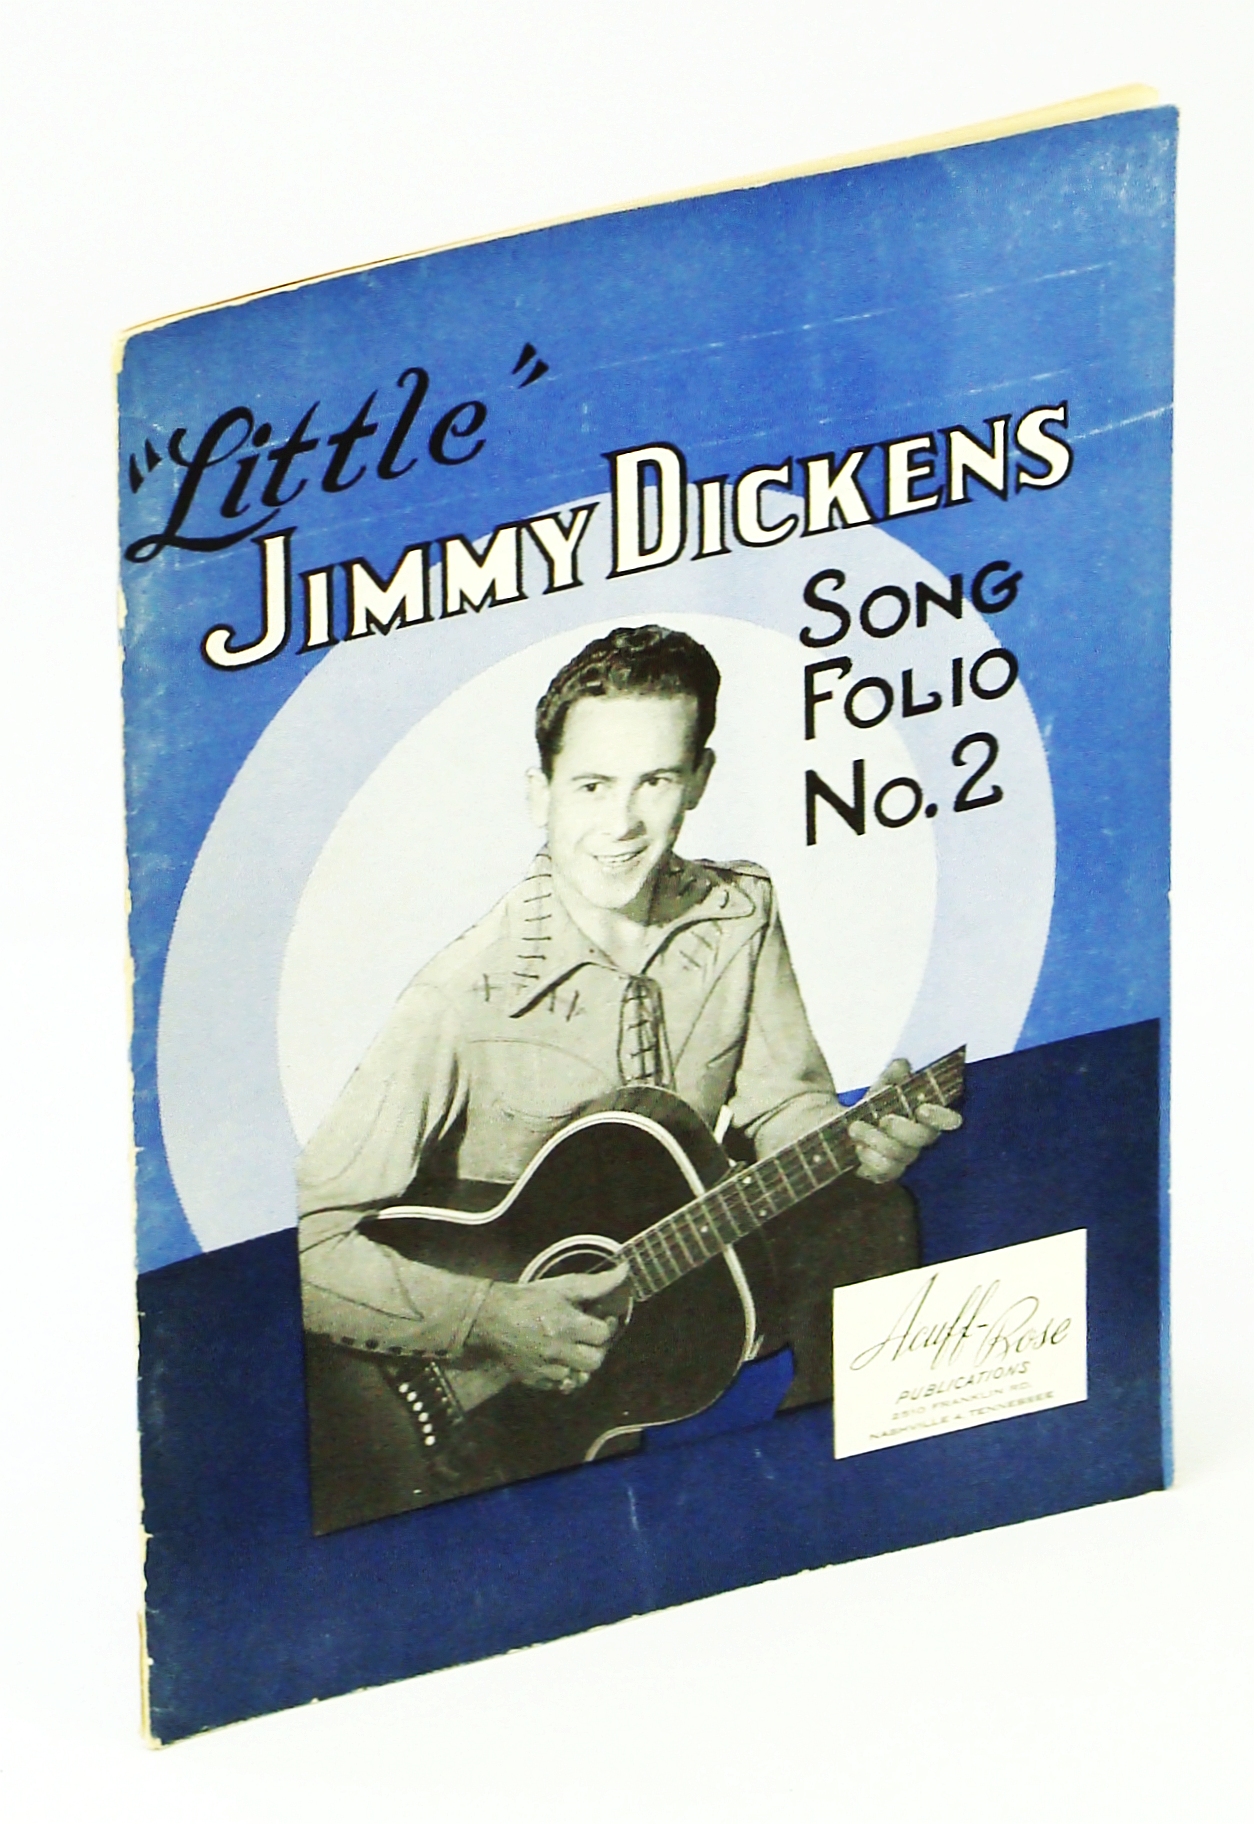 Image for "Little" Jimmy Dickens Song Folio No. 2 / Two: Piano Sheet Music with Lyrics and Guitar Chords